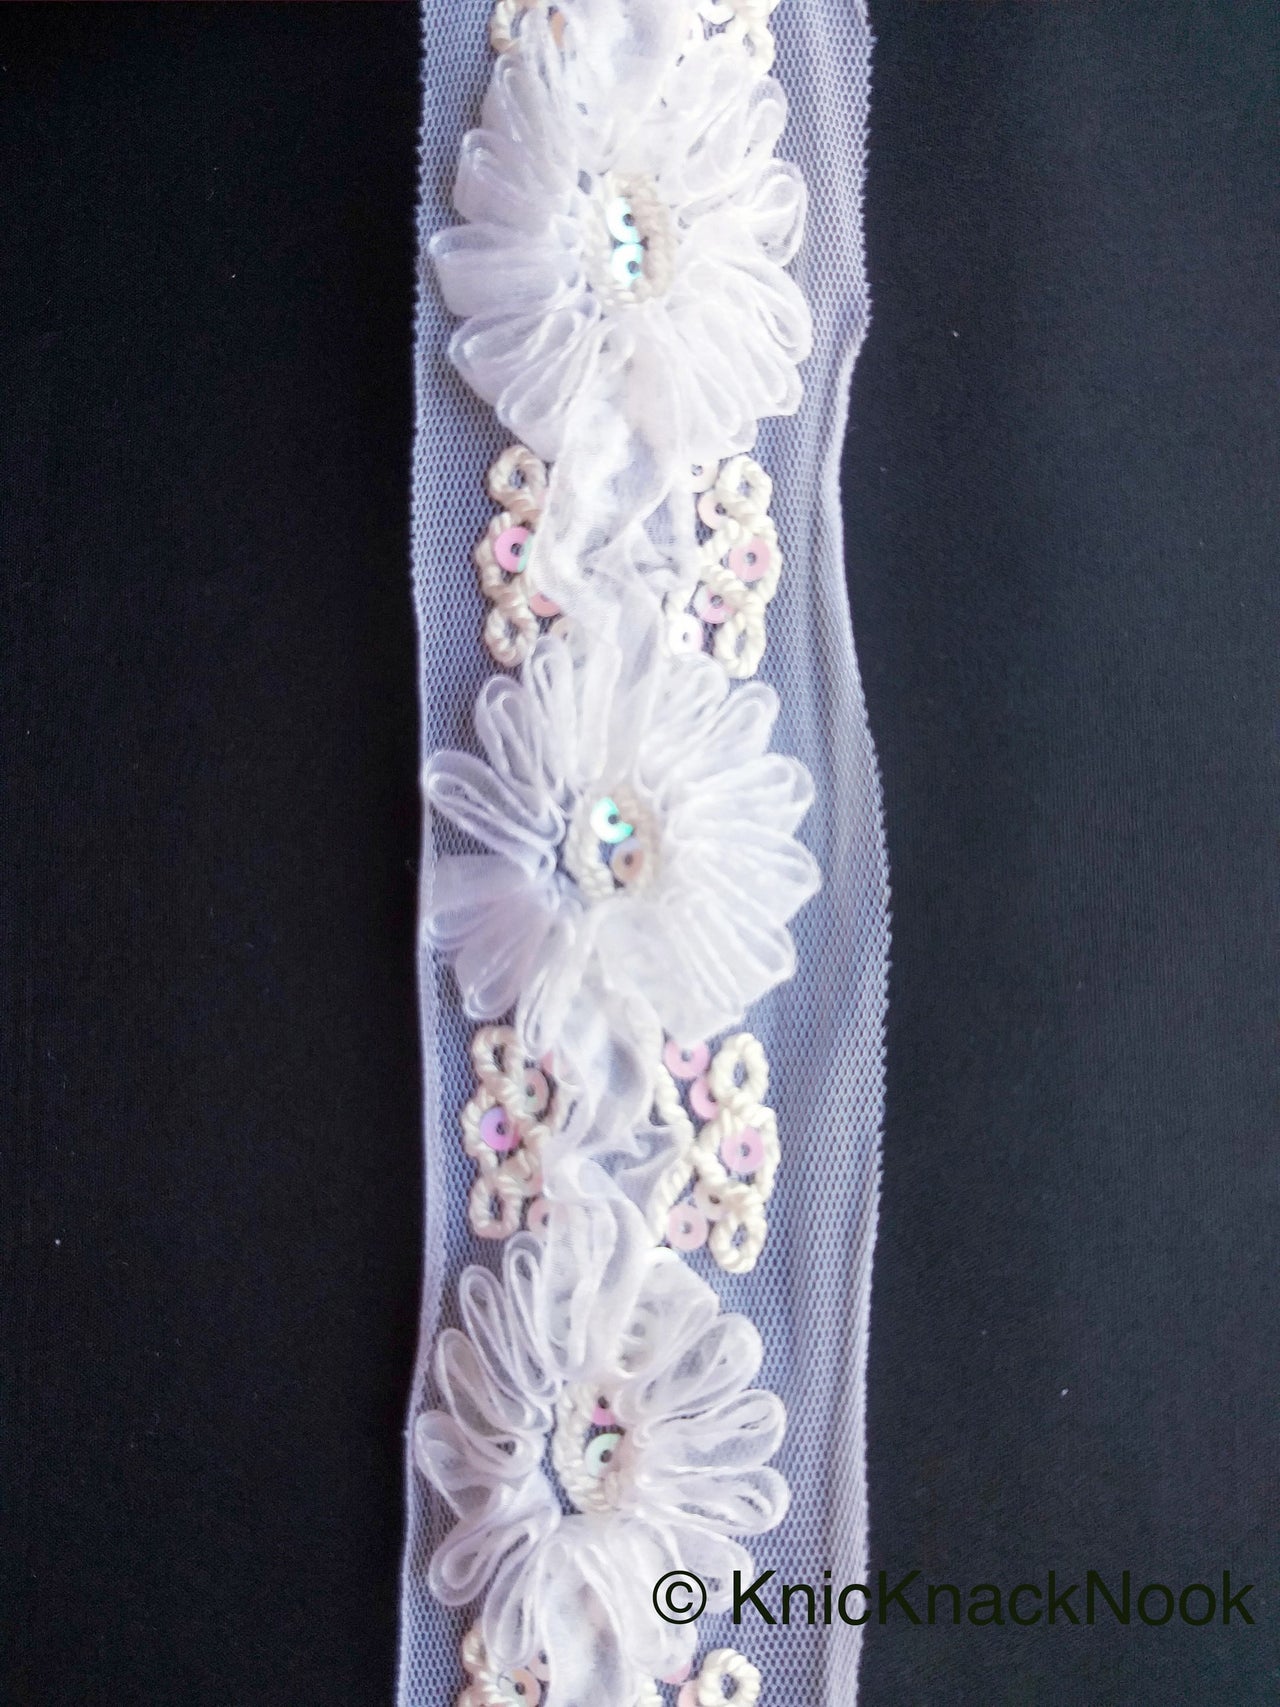 Wholesale White Flower Tissue Net Fabric Lace Trim With Sequins, Floral Trim, Wedding Supplies Trim By 9 Yards